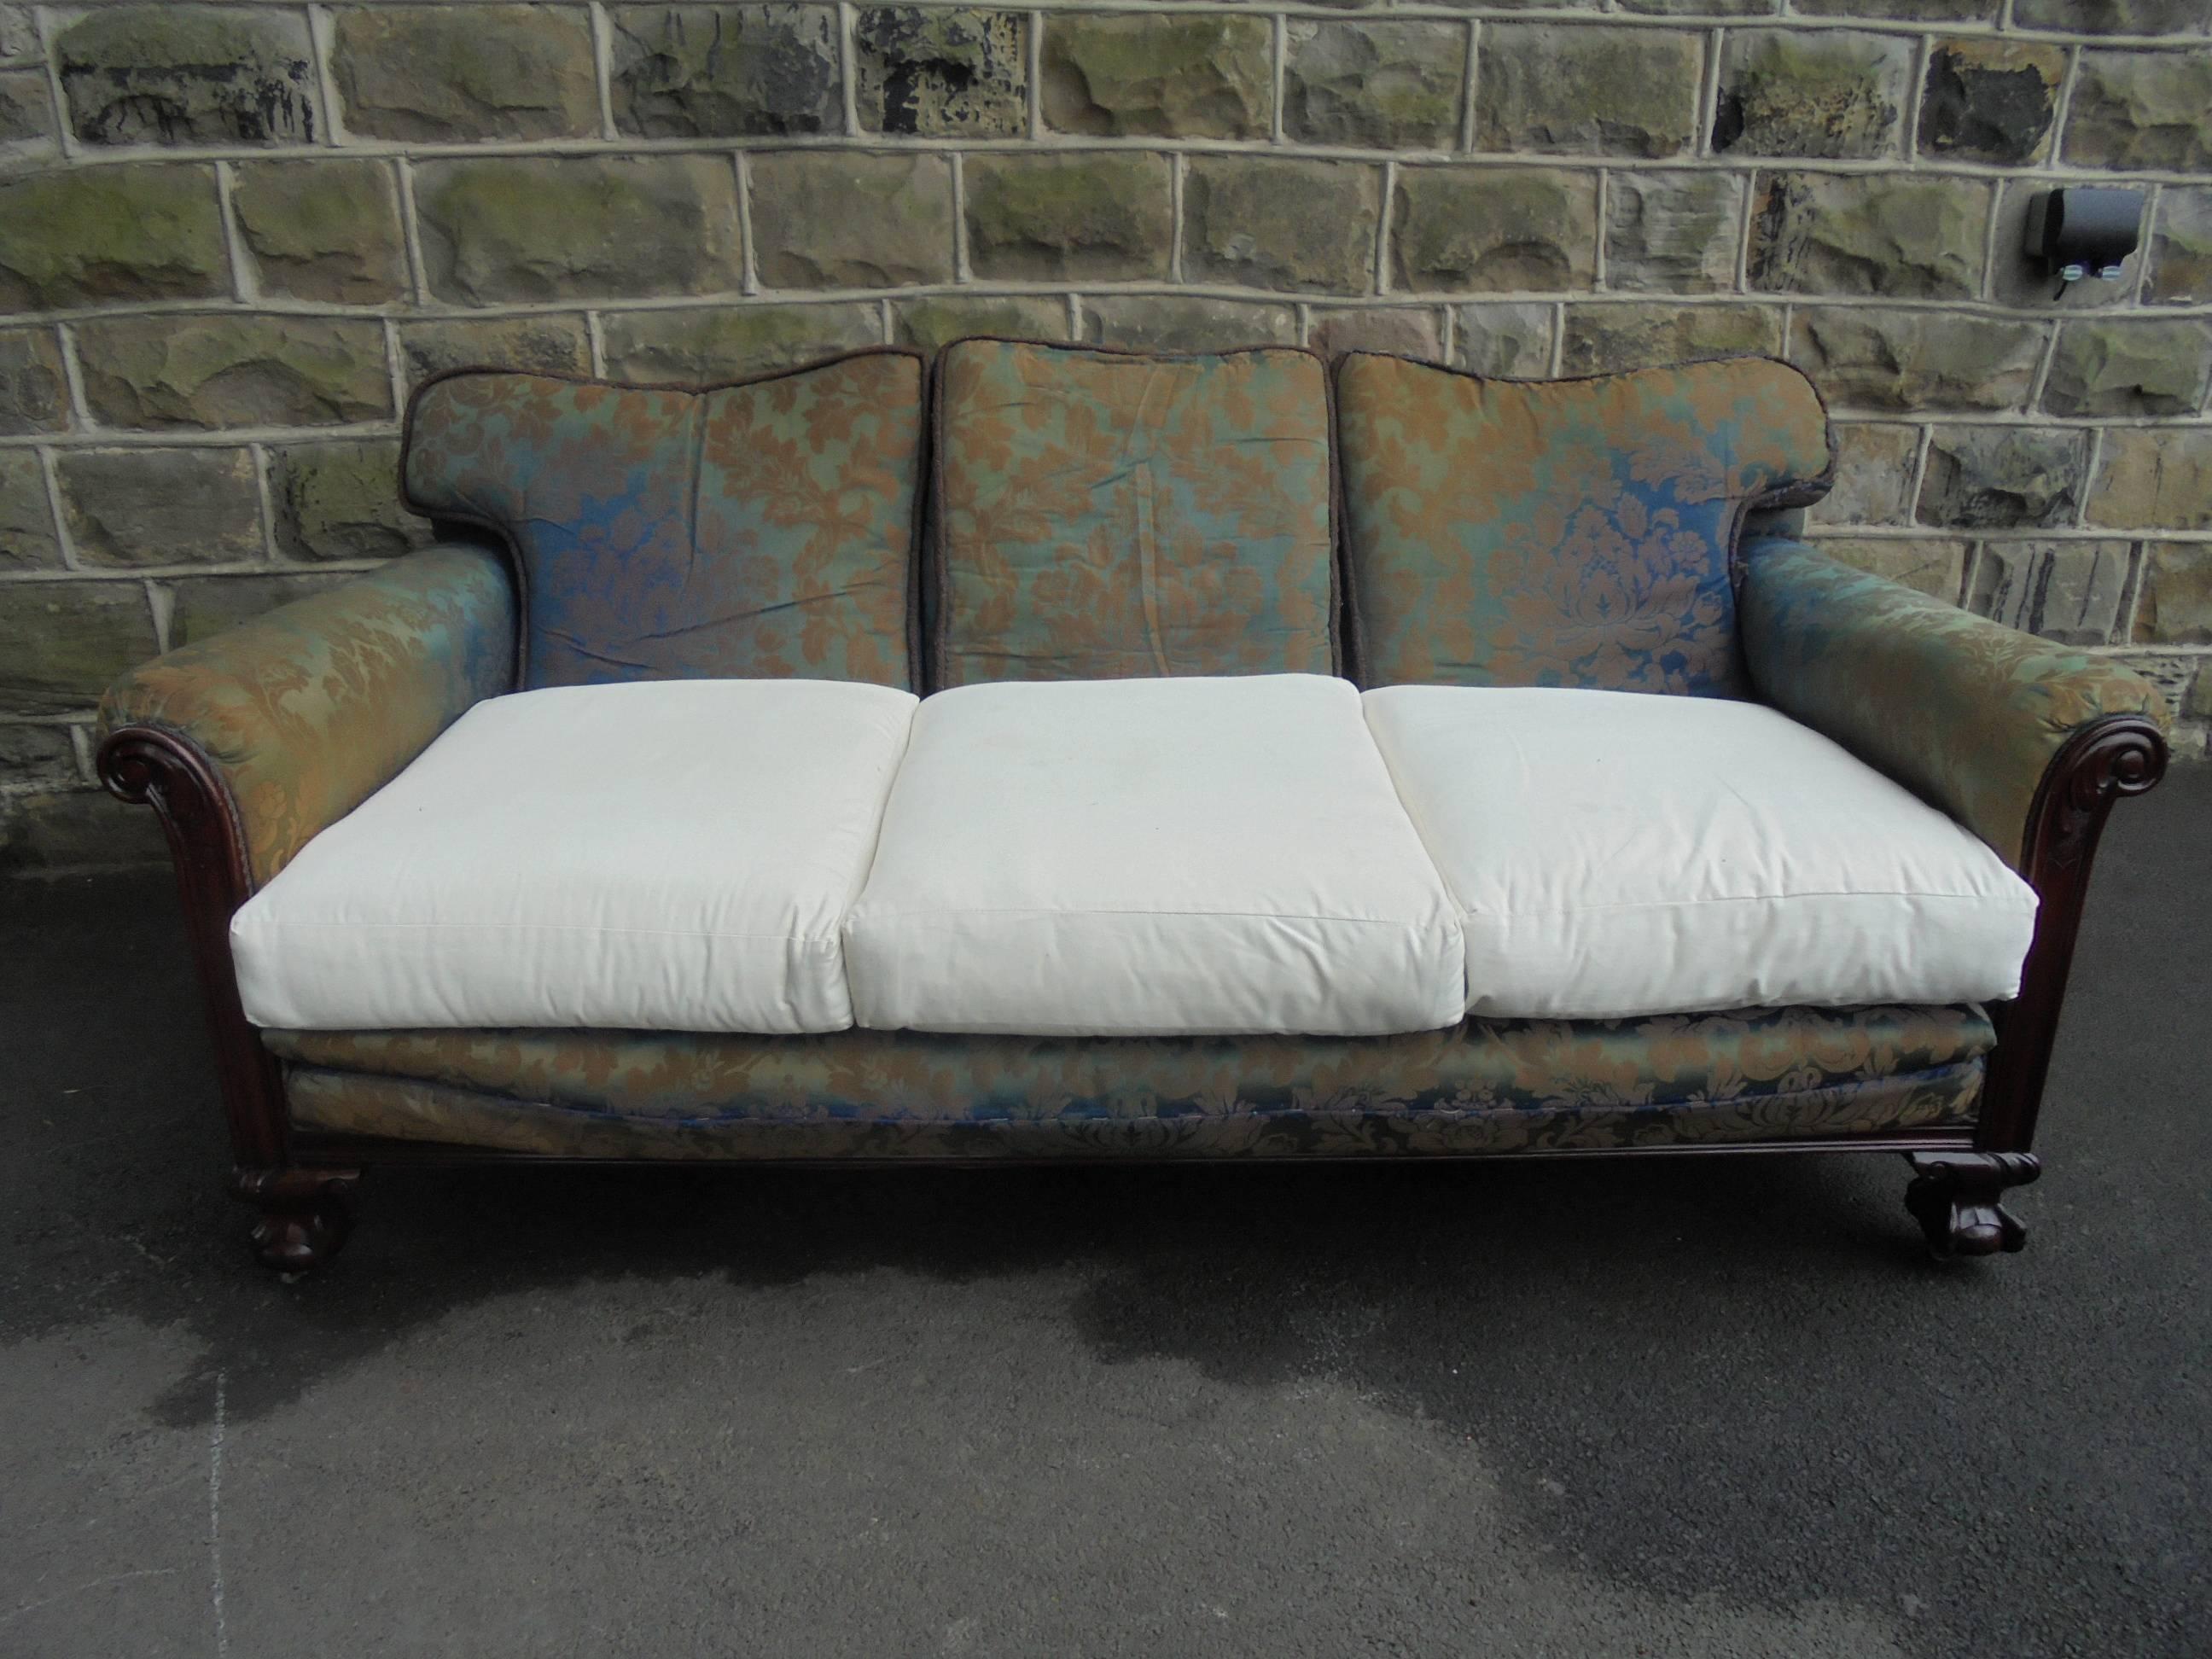 Offered for sale is this lovely shaped antique country house sofa. A very comfortable sofa. Great size and dimensions.

Covered in the original, chintz type fabric, the three-seat sofa has good deep seating area, having a wooden show wood frame